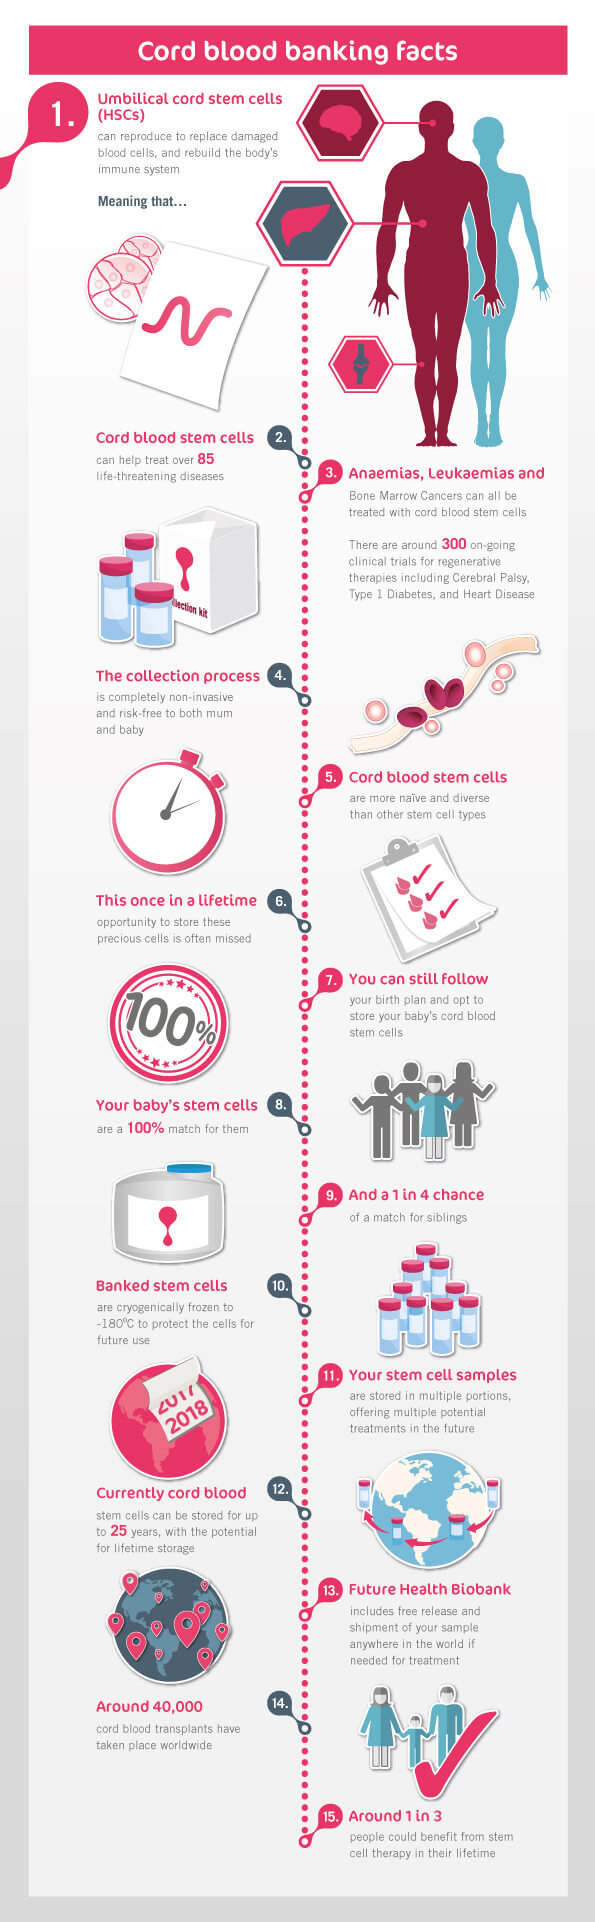 World Cord Blood Day 27 - Cord Blood Banking Facts